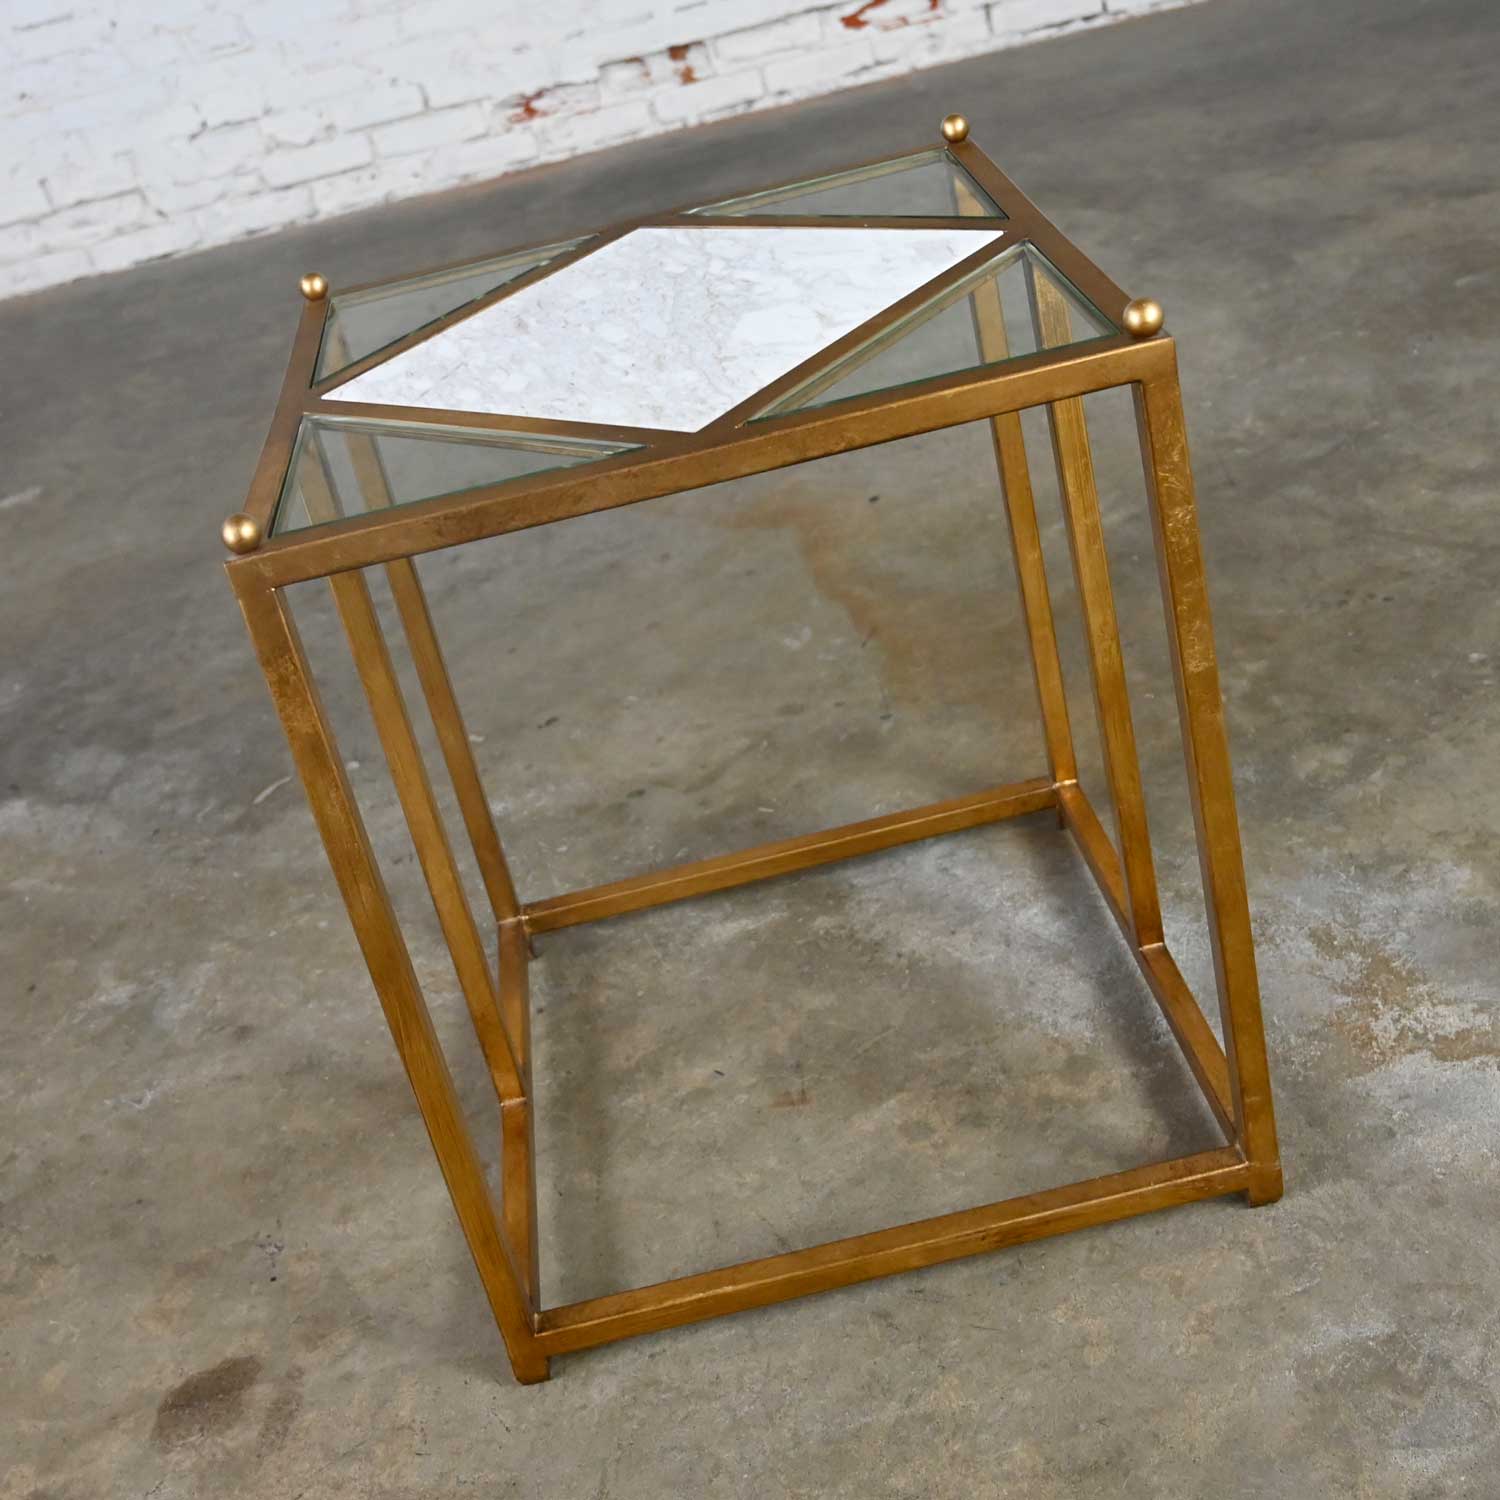 Chelsea House Jamie Merida Collection Iron Antique Gold Leaf Harlequin Side Table